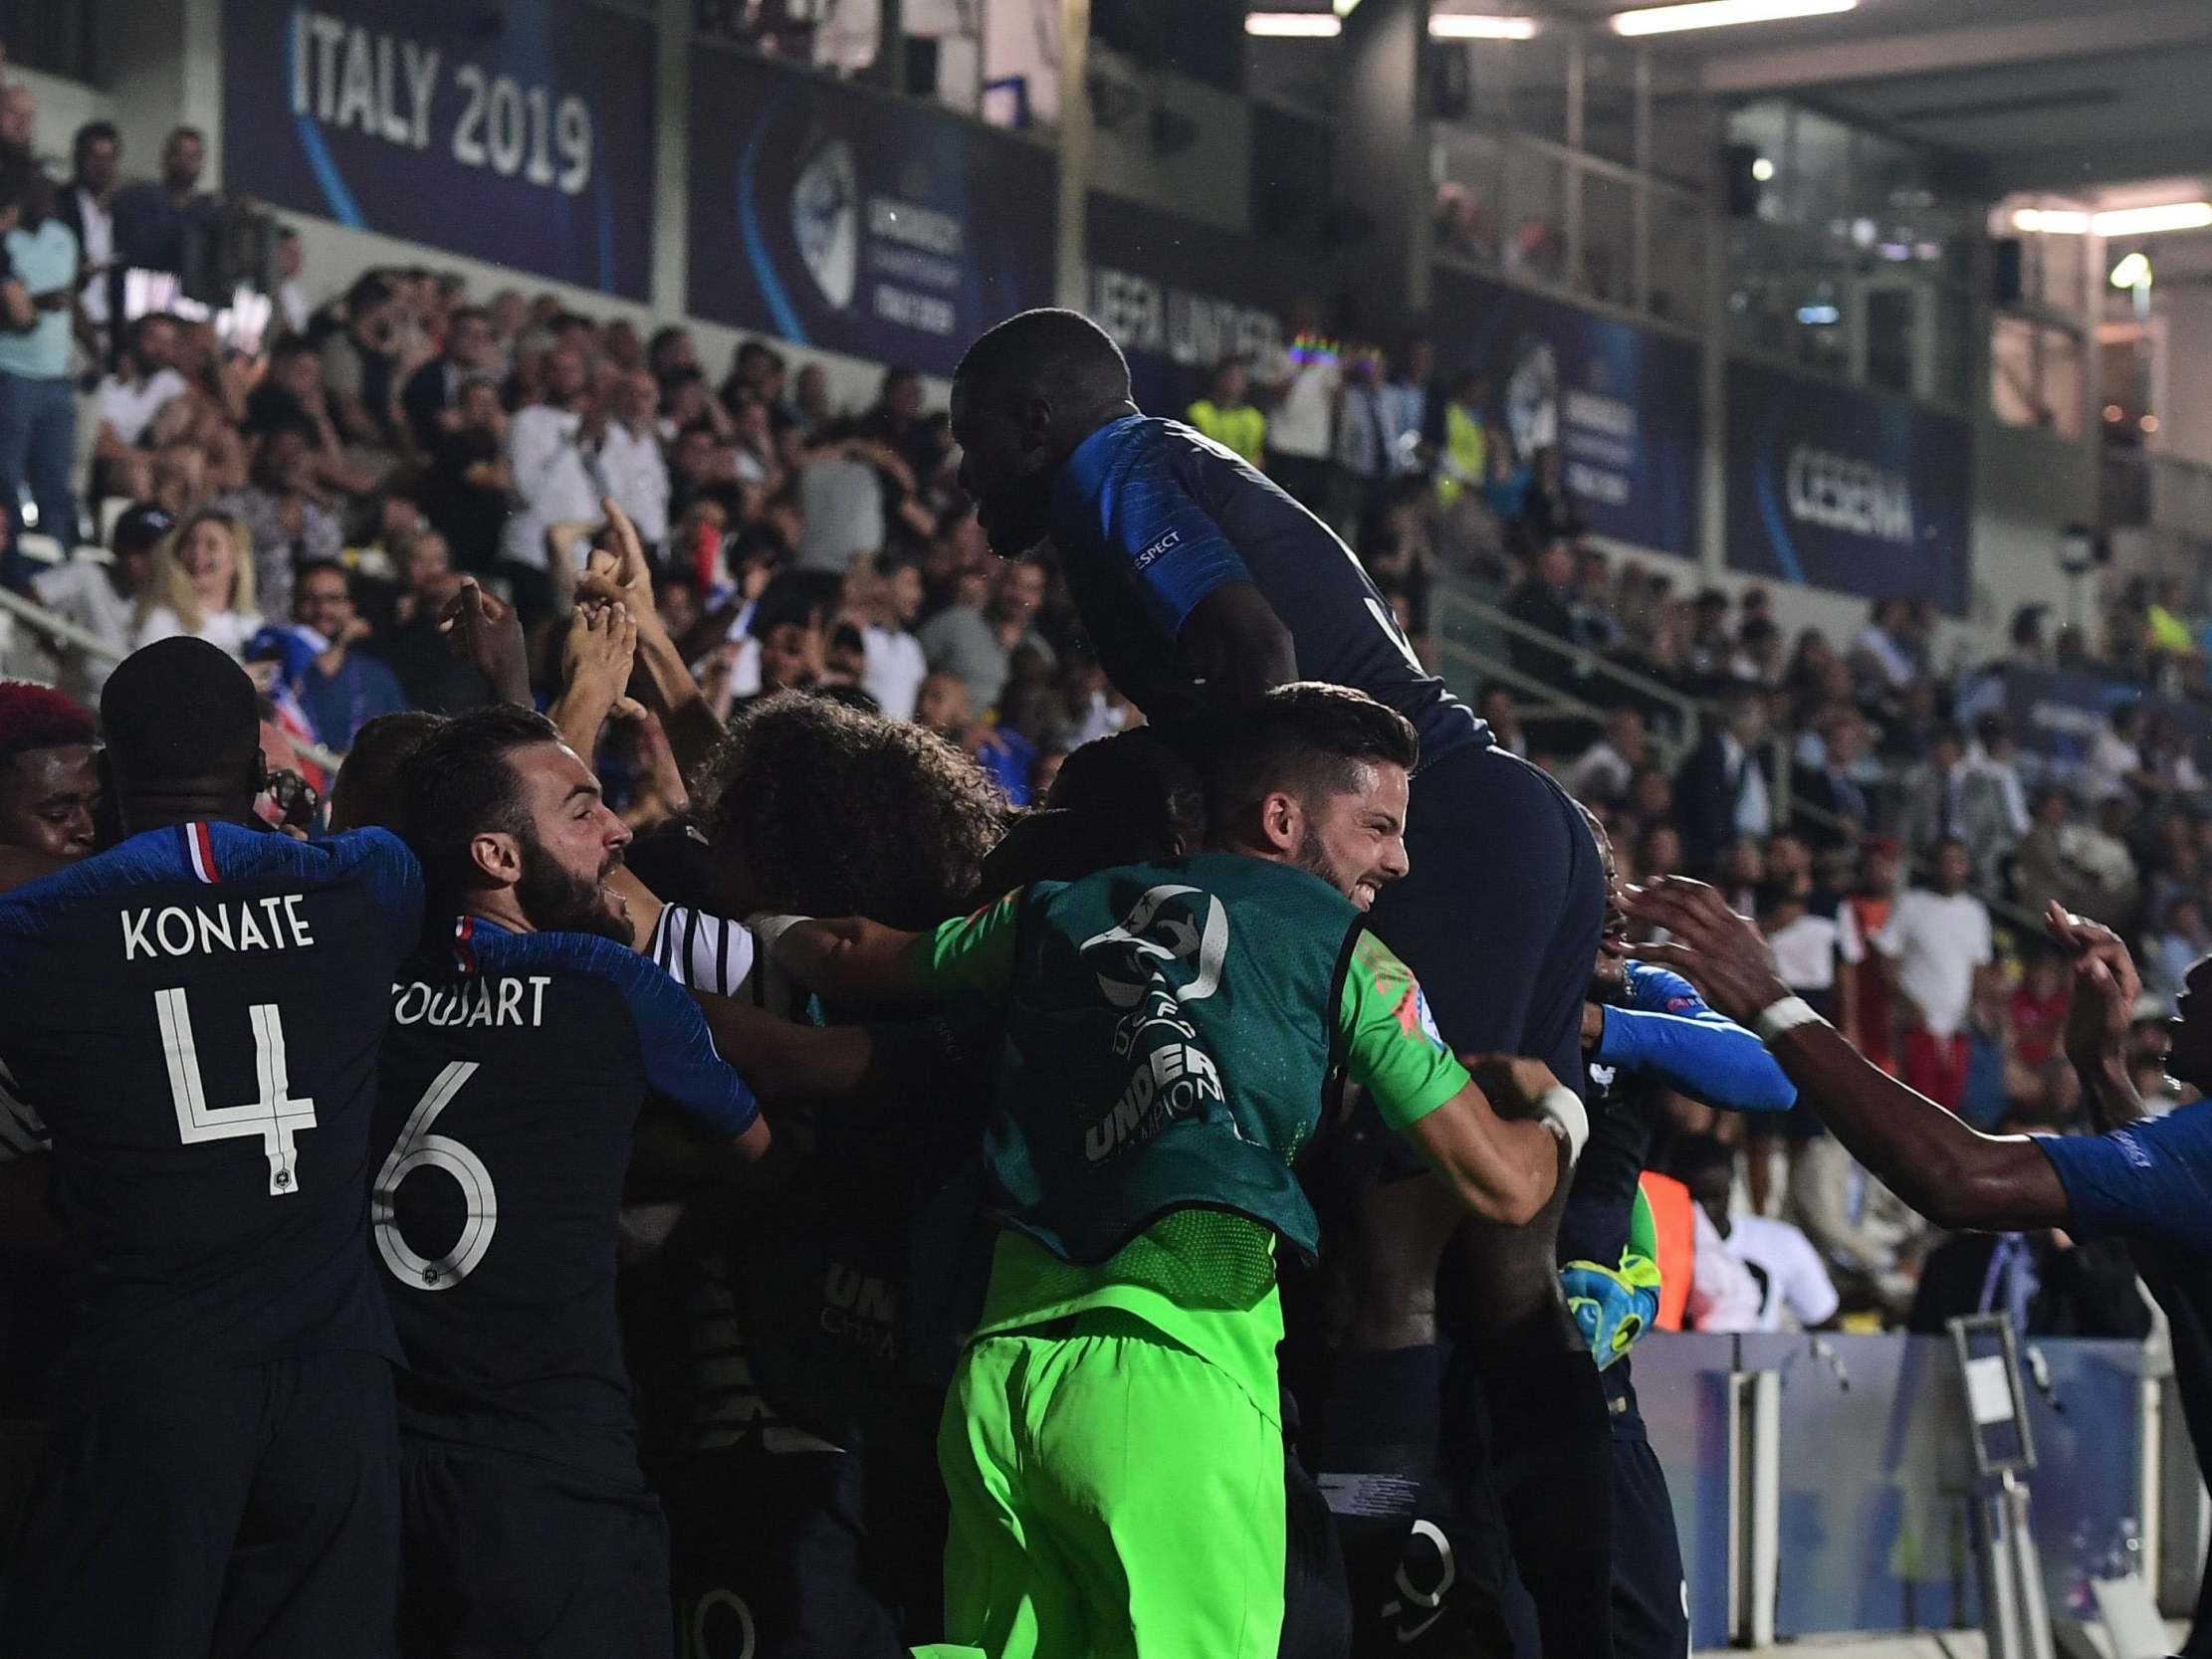 France's players celebrate after England scored an own goal during their Group C match